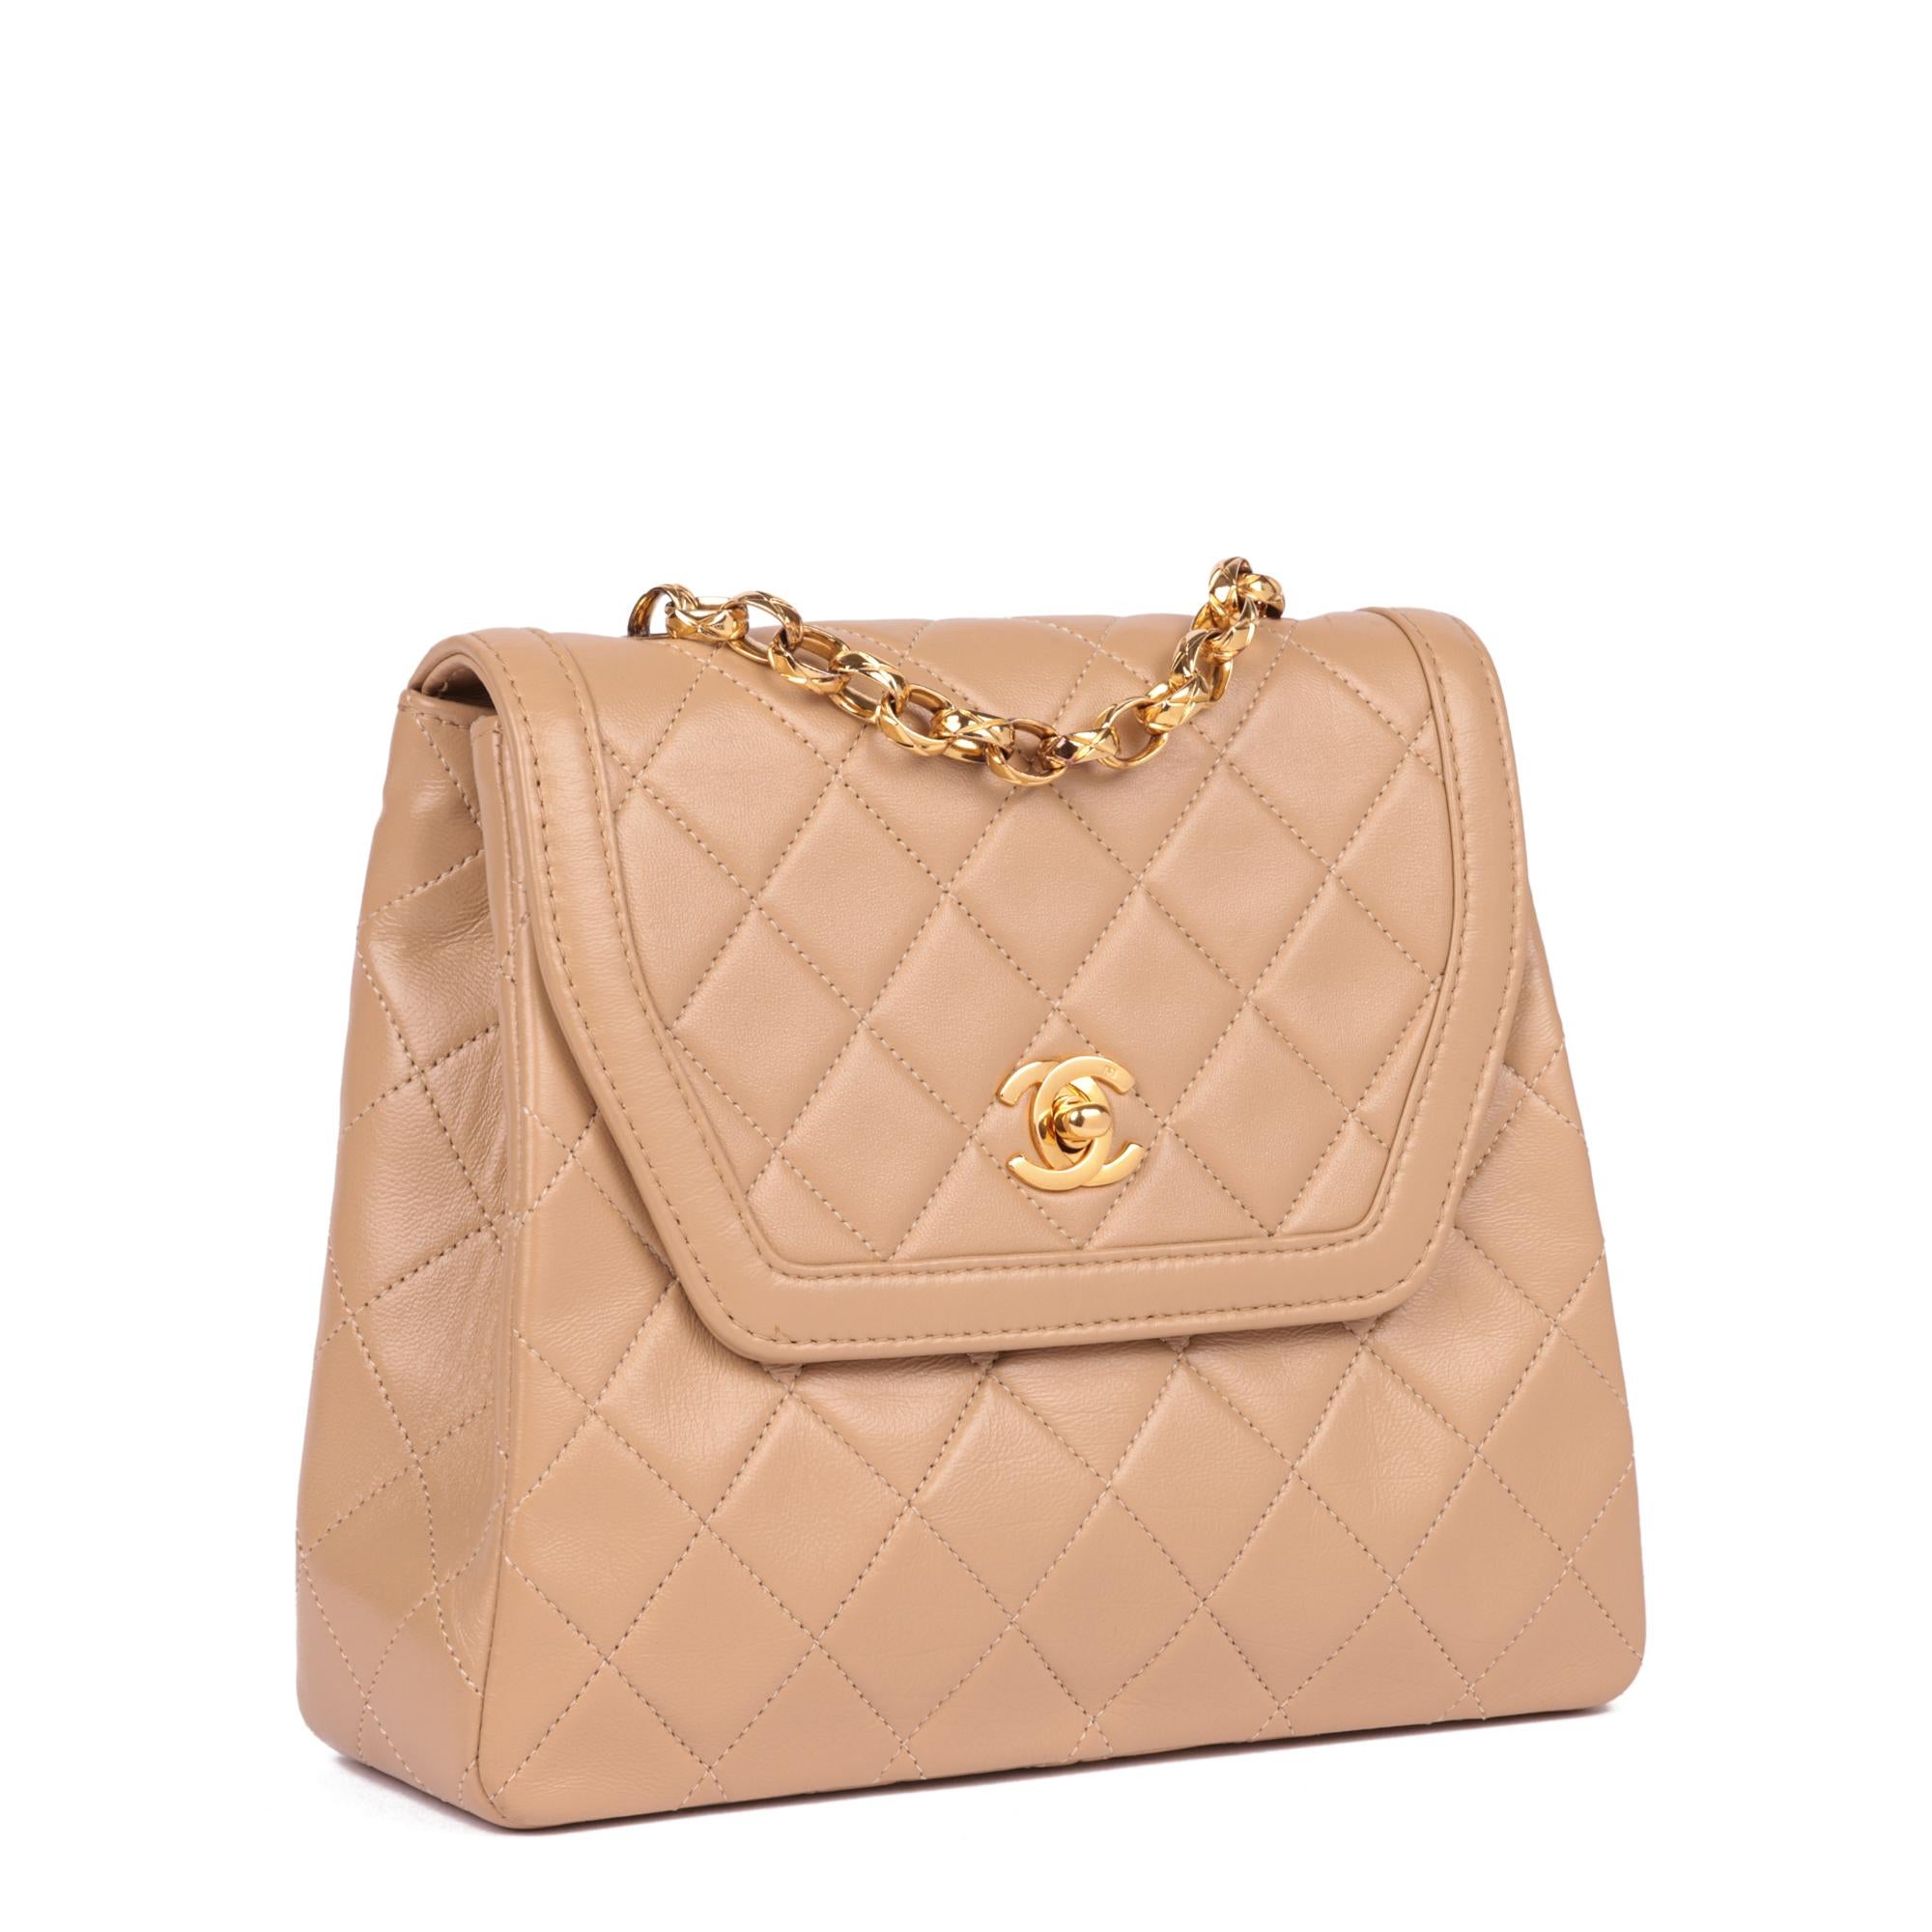 CHANEL
Beige Quilted Lambskin Vintage Mini Flap Bag with Wallet

Serial Number: 1661731
Age (Circa): 1990
Accompanied By: Chanel Dust Bag, Authenticity Card (The card is split)
Authenticity Details:  Authenticity Card, Serial Sticker (Made in